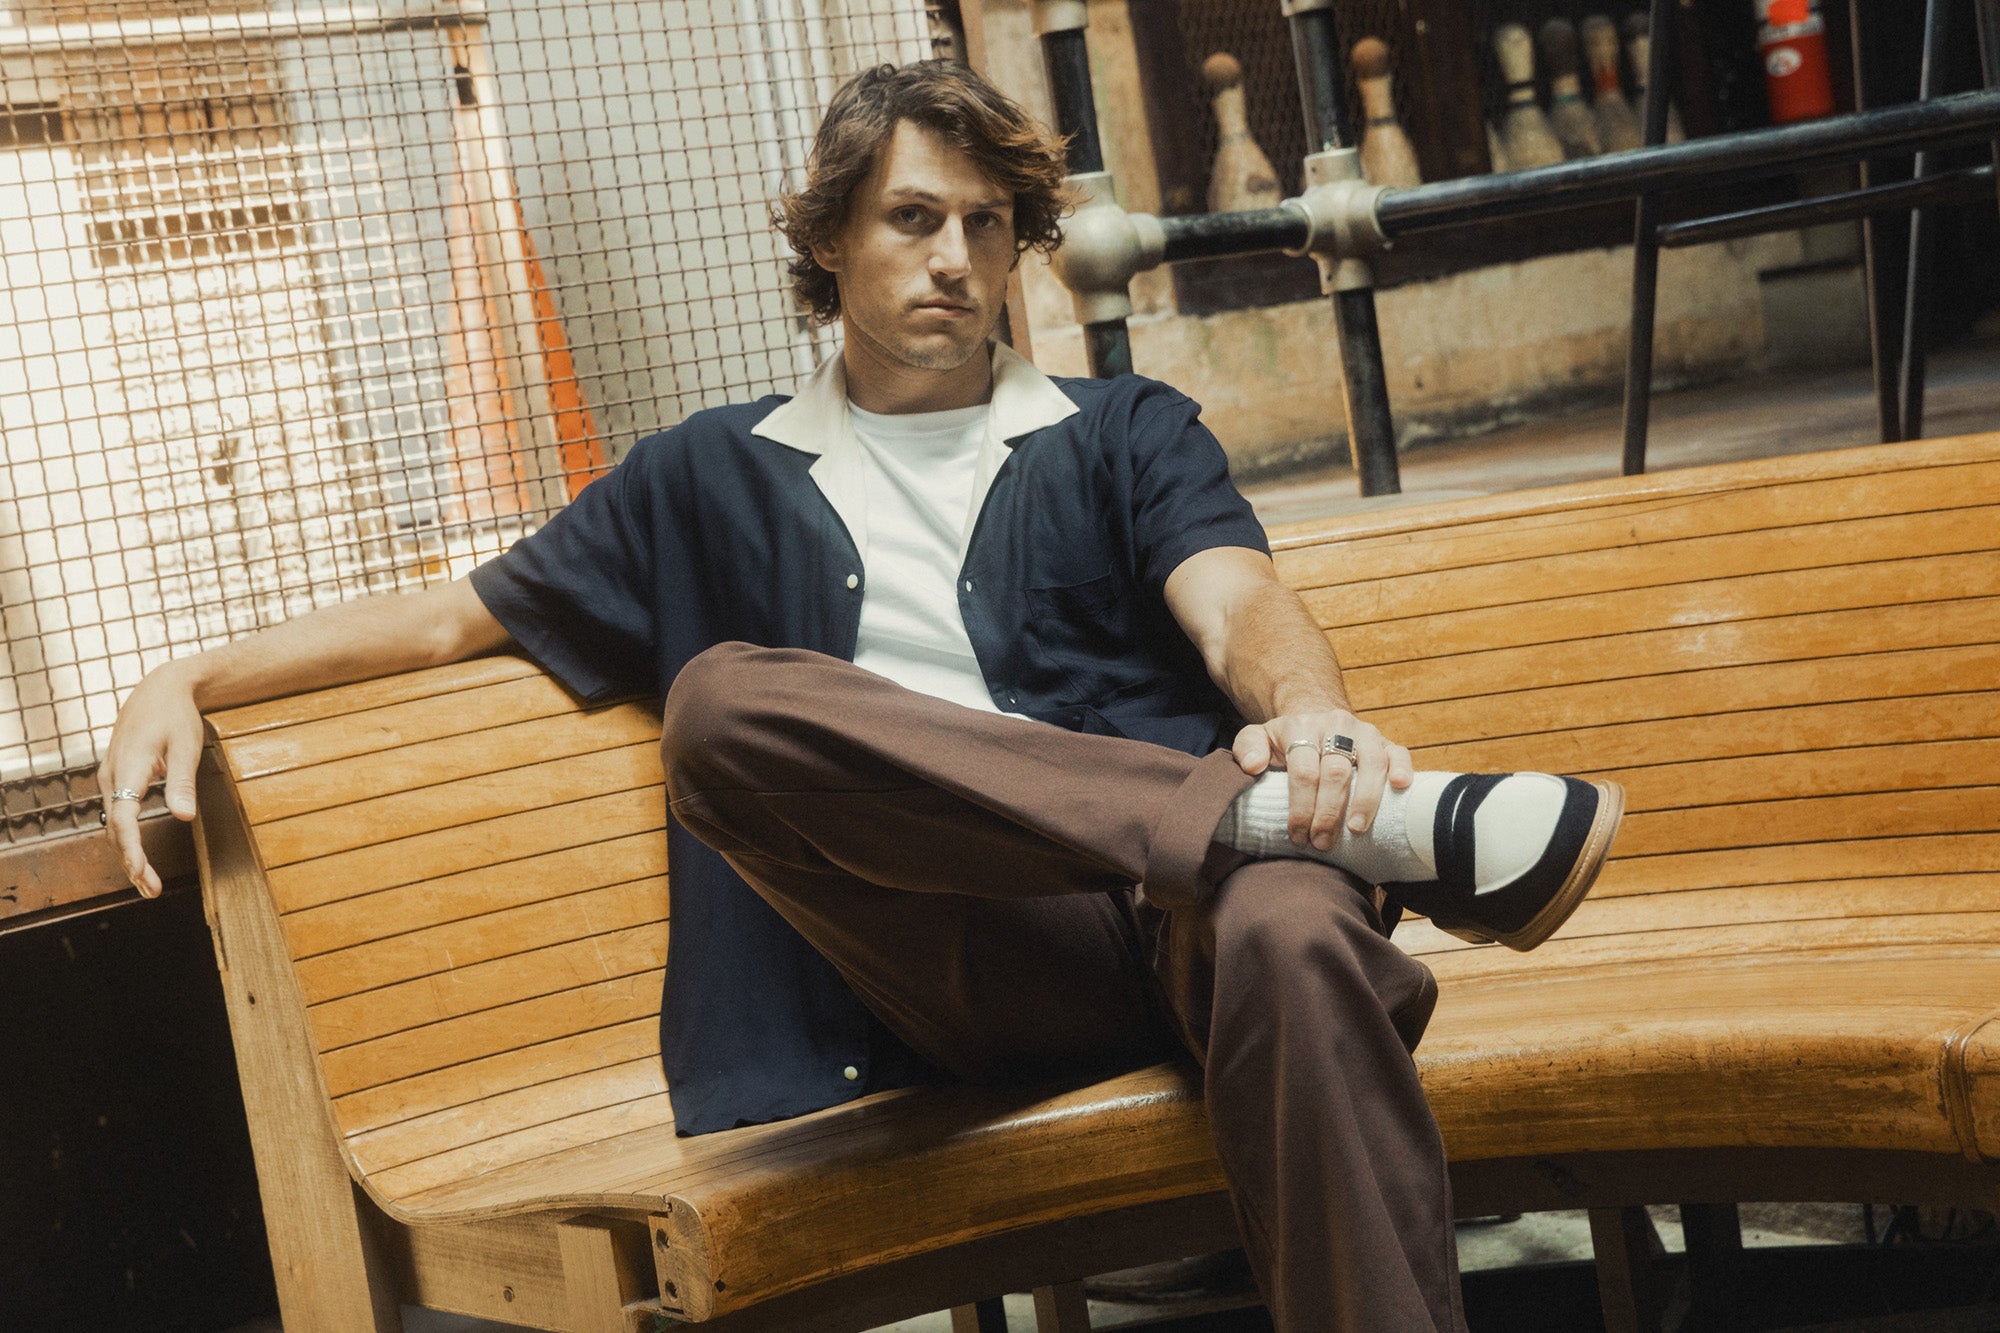 A man in a navy shirt and brown pants sits on a wooden bench.